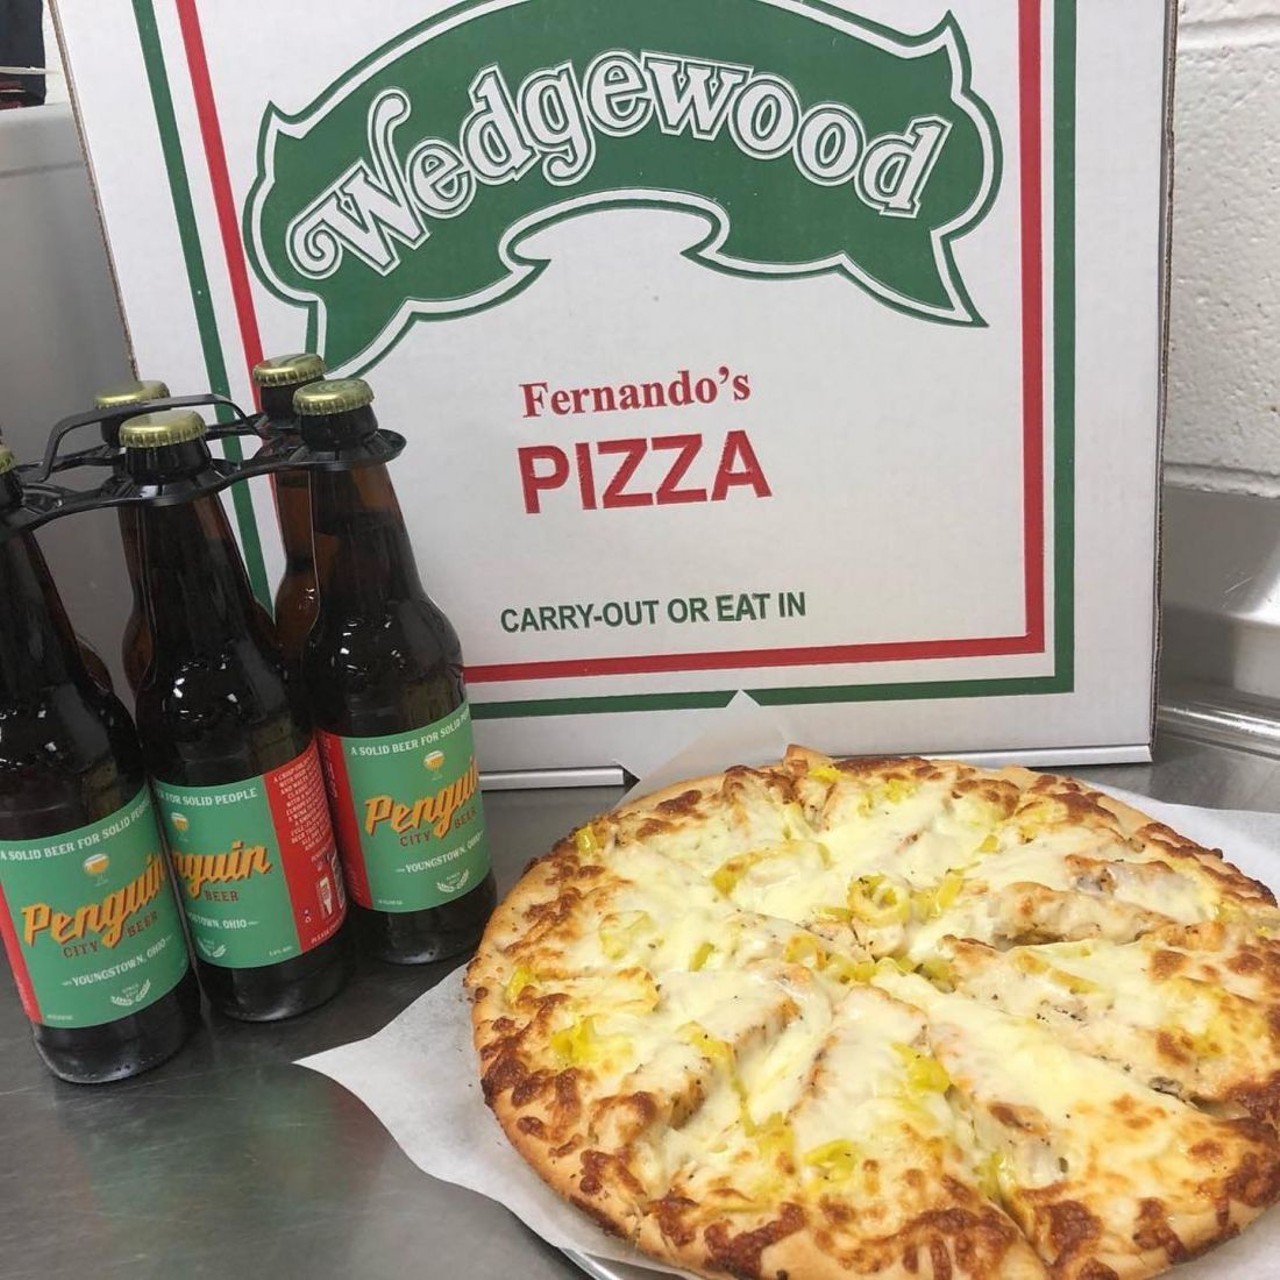 Wedgewood Pizza
Multiple Locations 
The greater Youngstown area is known for its Italian heritage and with that comes a city that lives and dies by their pizza. Everyone in Youngstown has their own favorite, from Giangelo&#146;s Avalon, Ianazone&#146;s, Uptown, Republic and Belleria to Leo&#146;s, Sunrise Inn, Bella Napoli, Cocca&#146;s, Cornersburg and Bruno Bros. While we&#146;re partial to Wedgewood, there&#146;s so much tasty pizza in the Mahoning Valley that we don&#146;t blame anyone for their preference. Even if they&#146;re wrong.
Photo via Wedgewood Pizza/Facebook